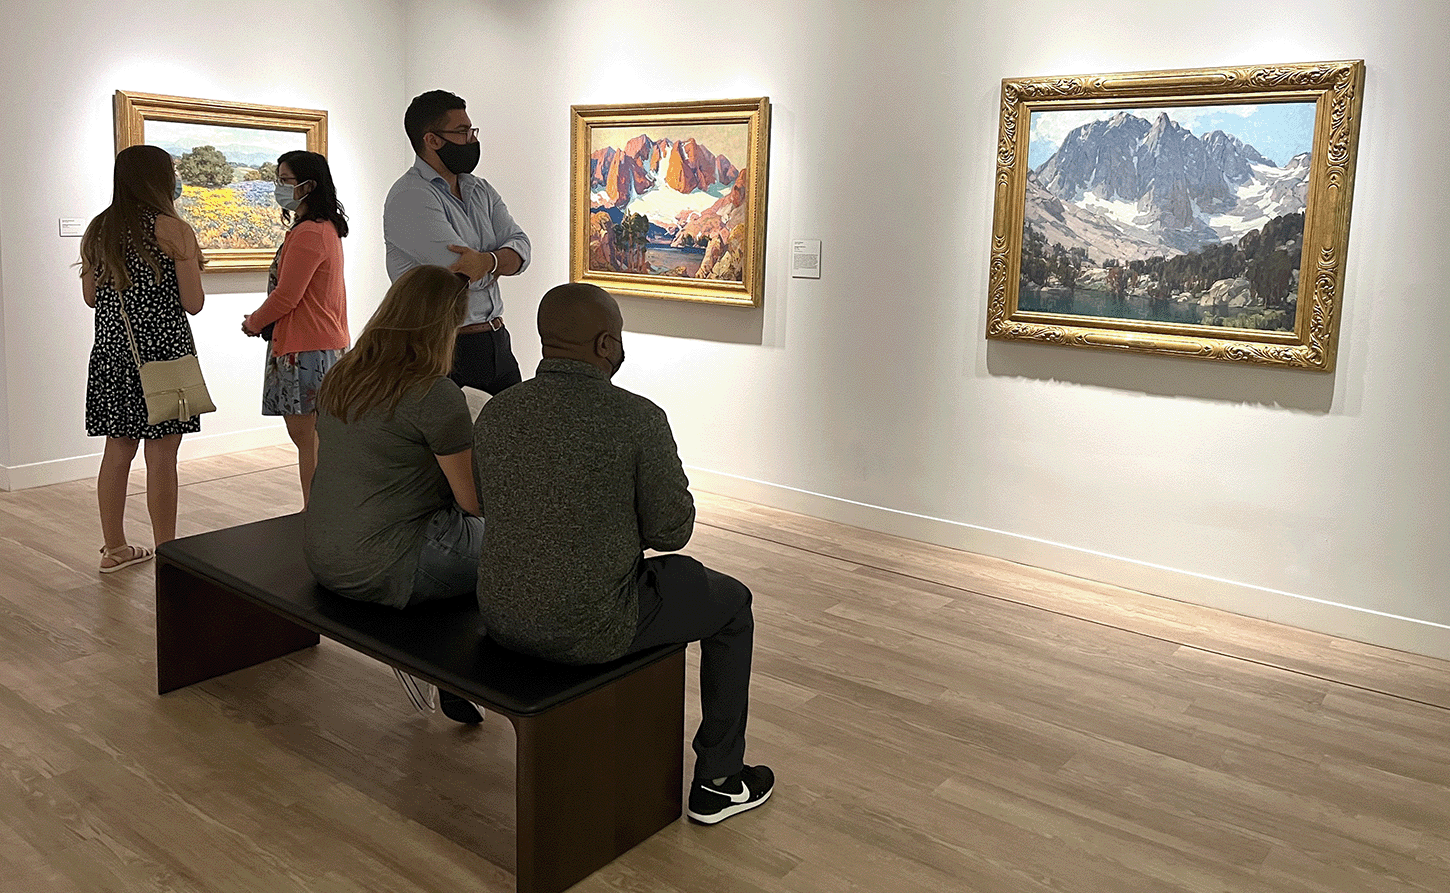 Guests view artwork at the museum